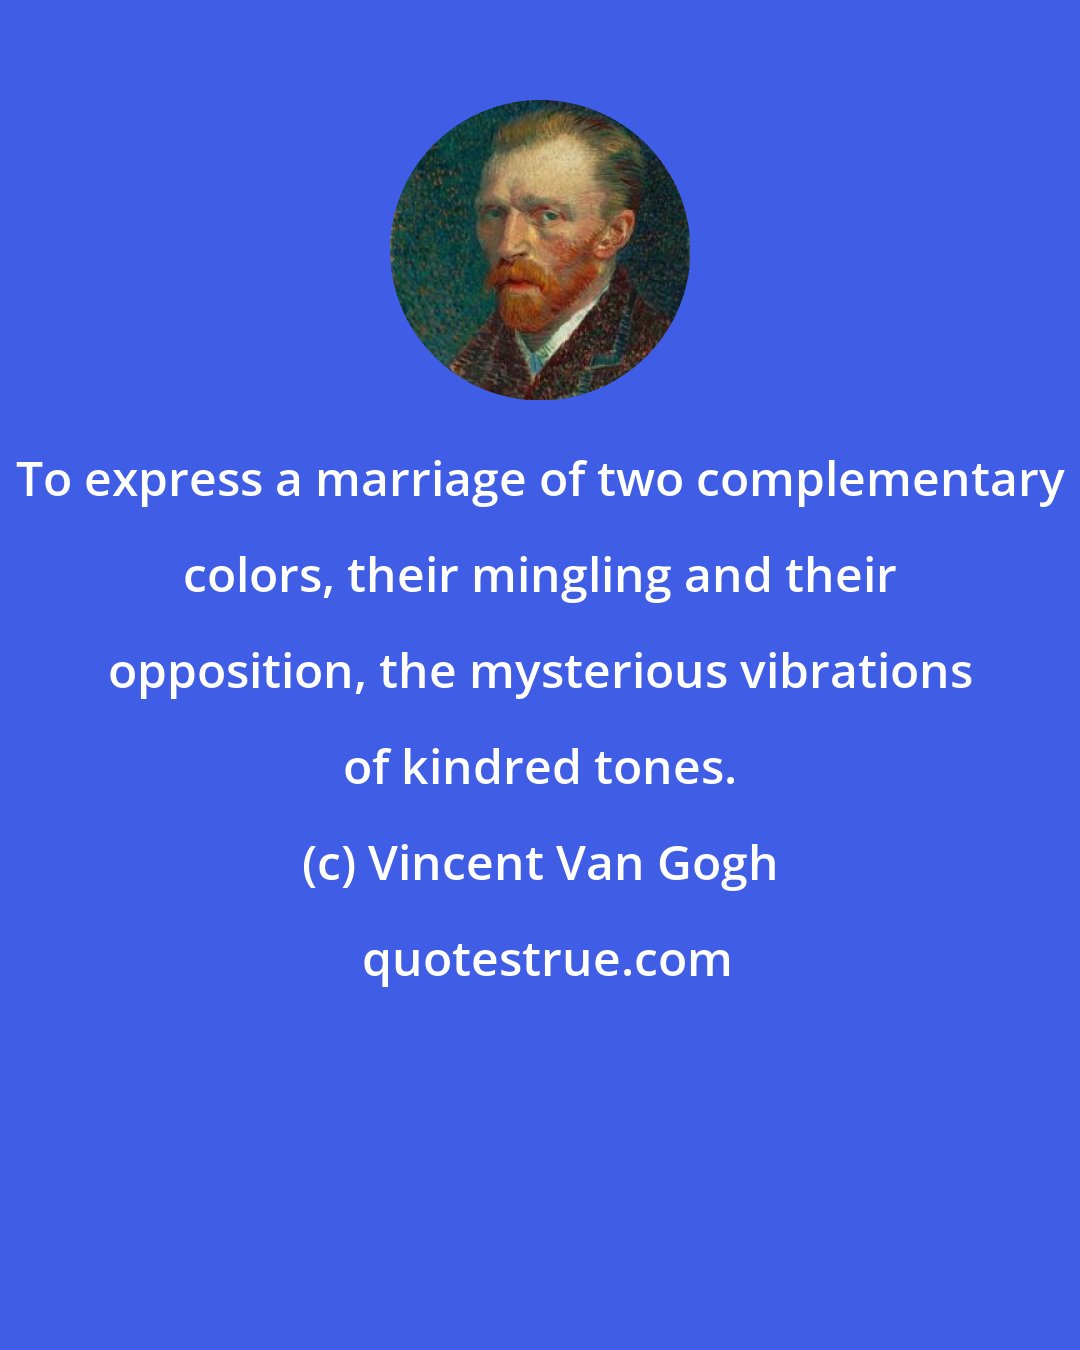 Vincent Van Gogh: To express a marriage of two complementary colors, their mingling and their opposition, the mysterious vibrations of kindred tones.